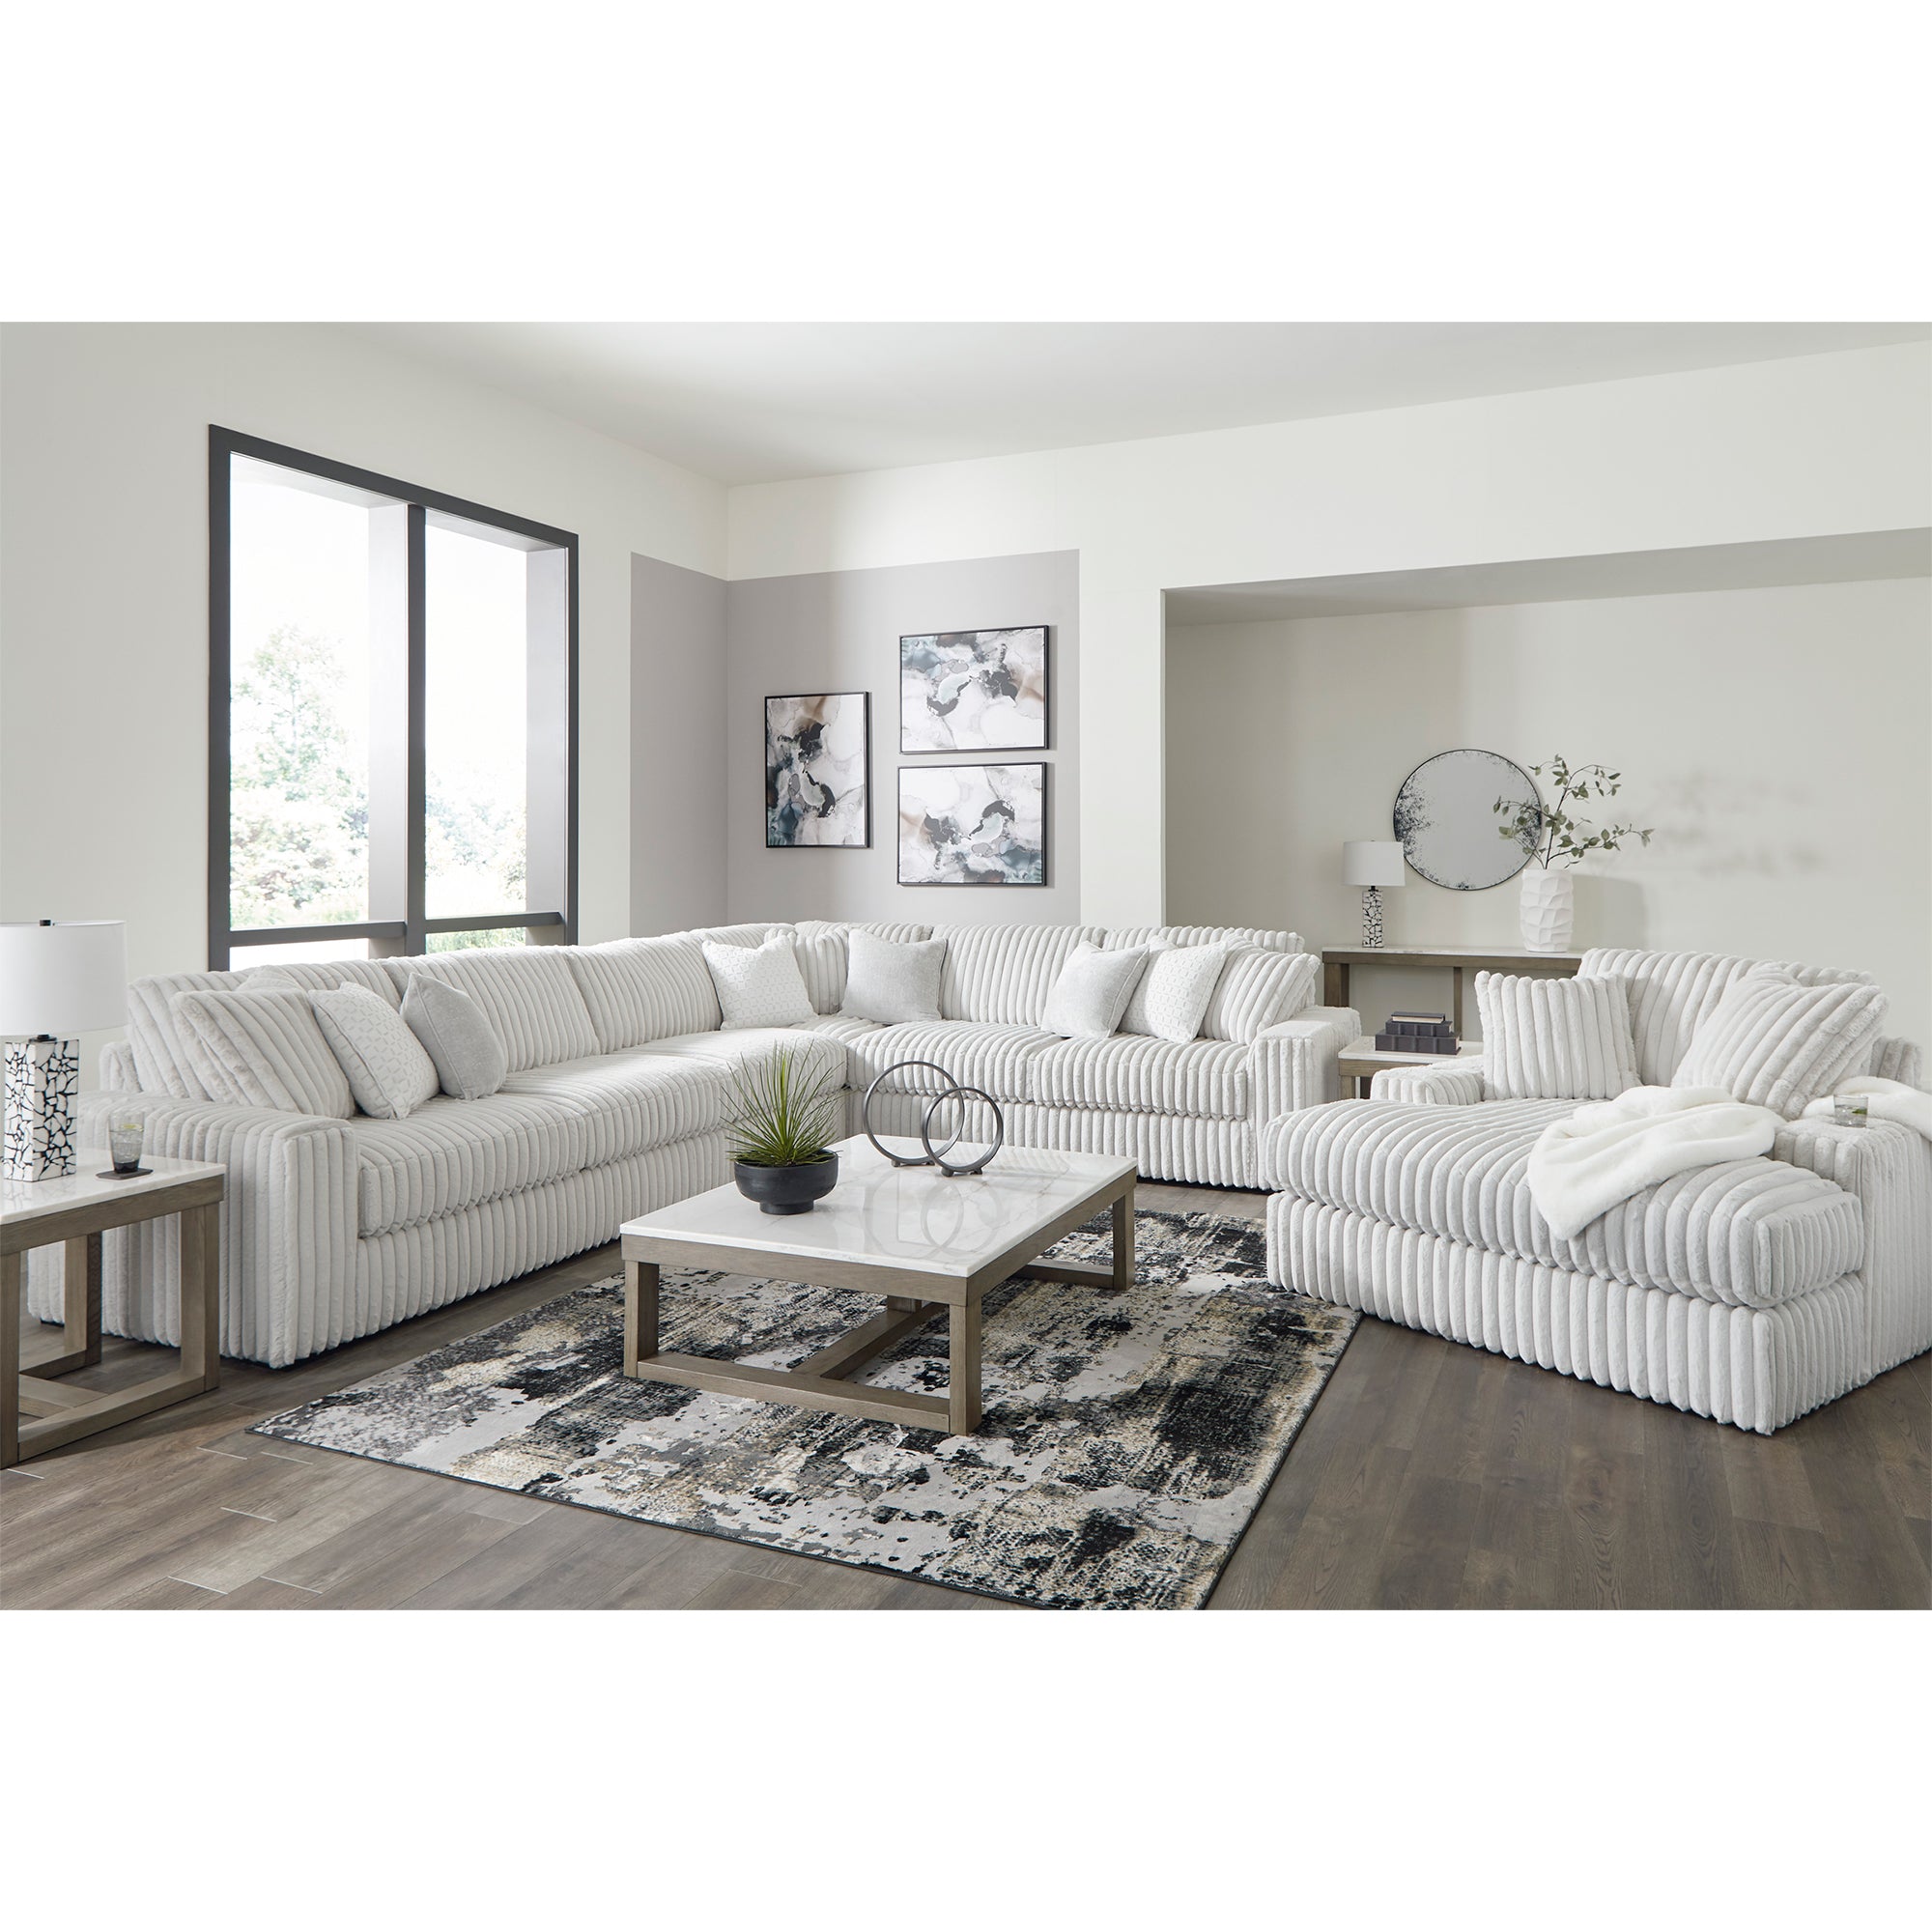 Sophisticated Stupendous Sectional with a smooth platform foundation, maintains a wrinkle-free look without dips or sags